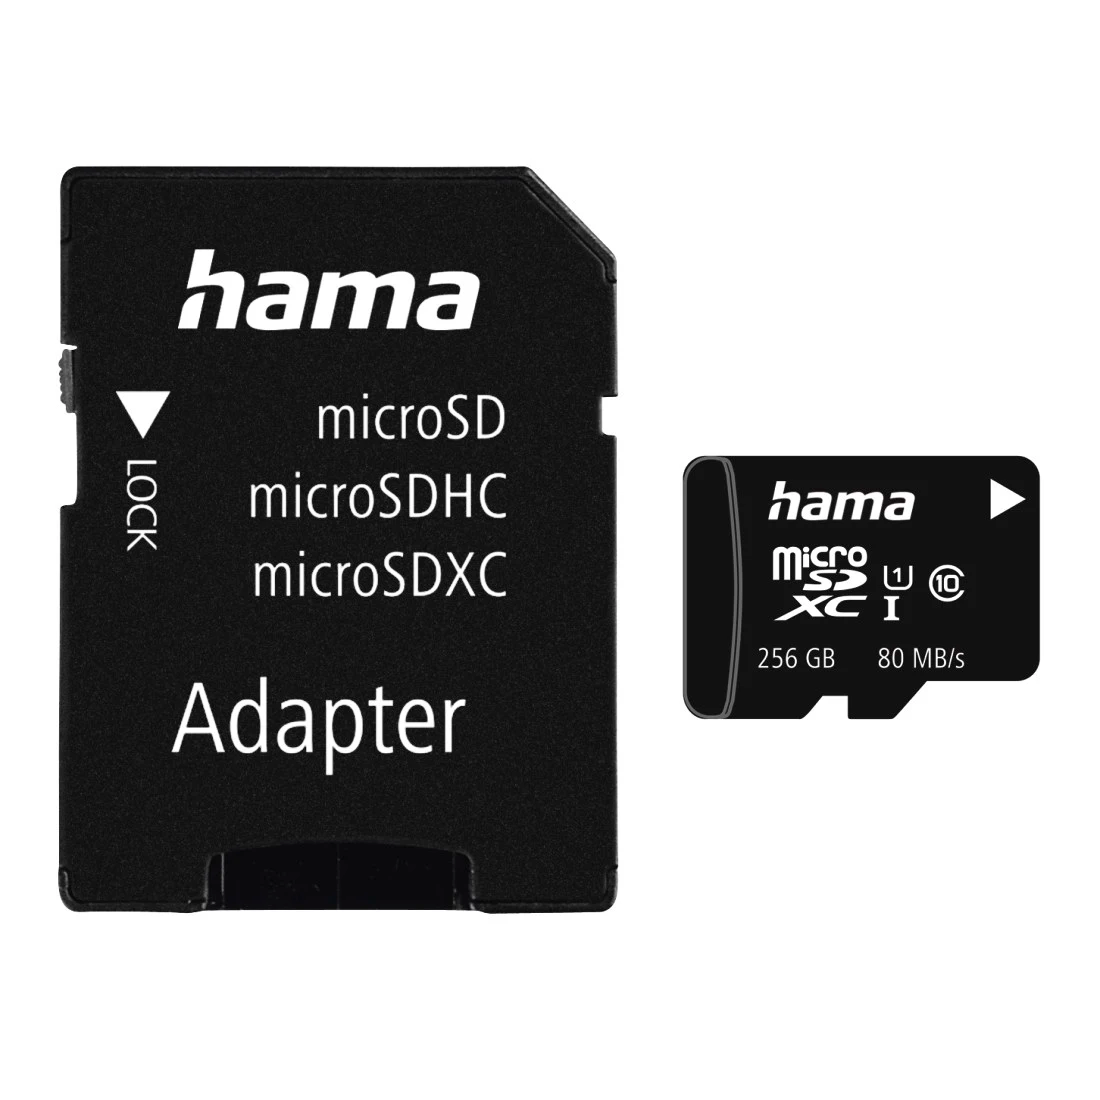 Hama MicroSDXC UHS-I 80MB/s Class 10 256GB Memory Card with Adapter - Black | 334671 from Hama - DID Electrical